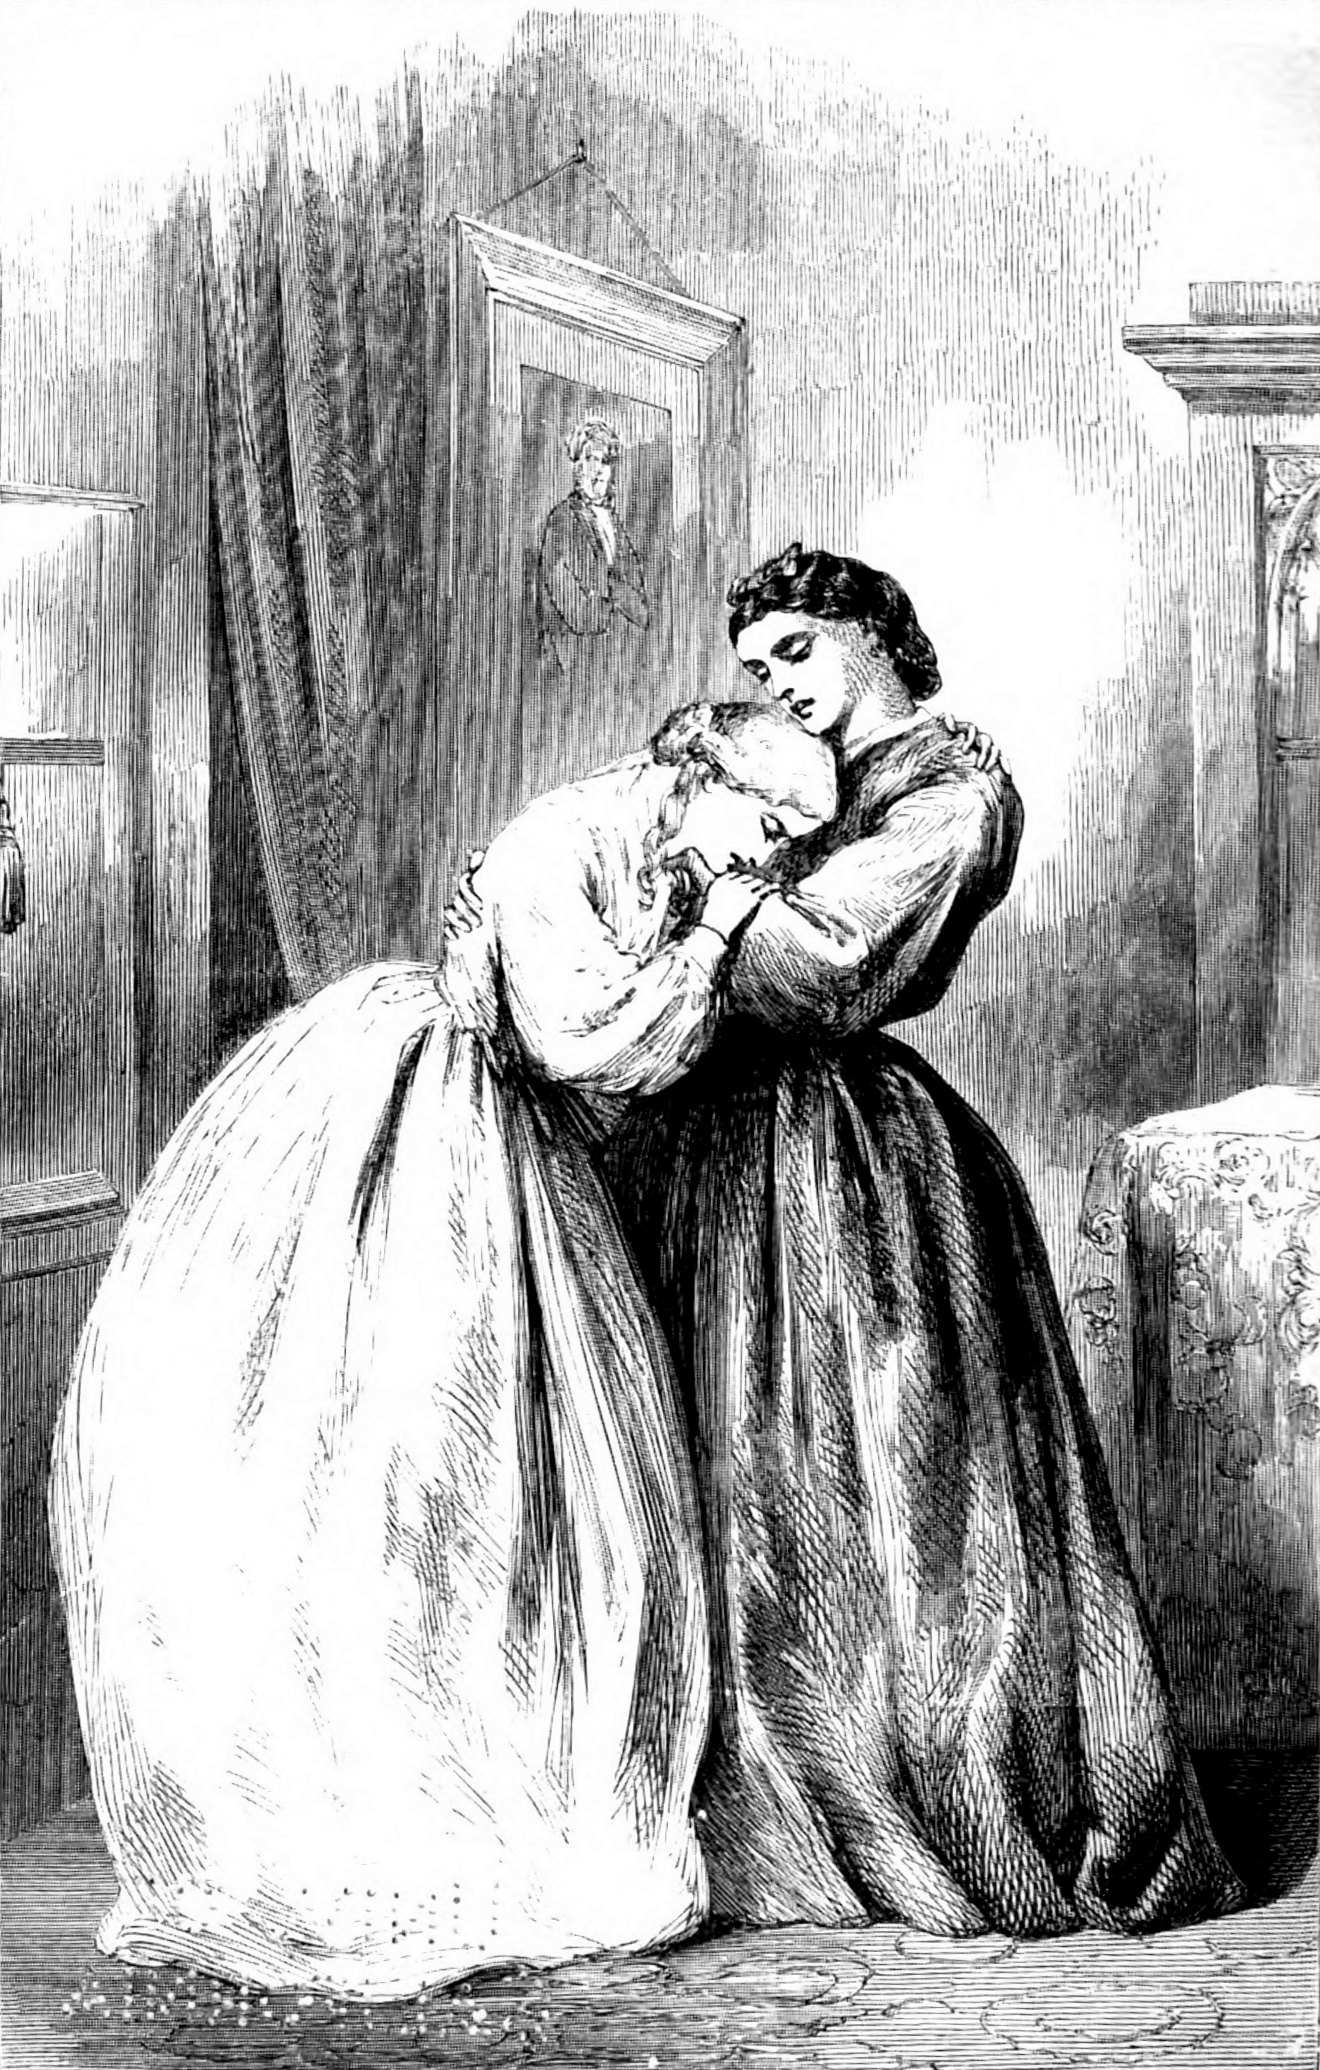 Image Description: Two people stand close to each other in an interior room. Elsie, a blonde woman in a light colored dress, leans againsst the chest of Margaret, a dark haired woman in a darker colored dress. Elsie is crying and clutching Margaret's wrist. End ID